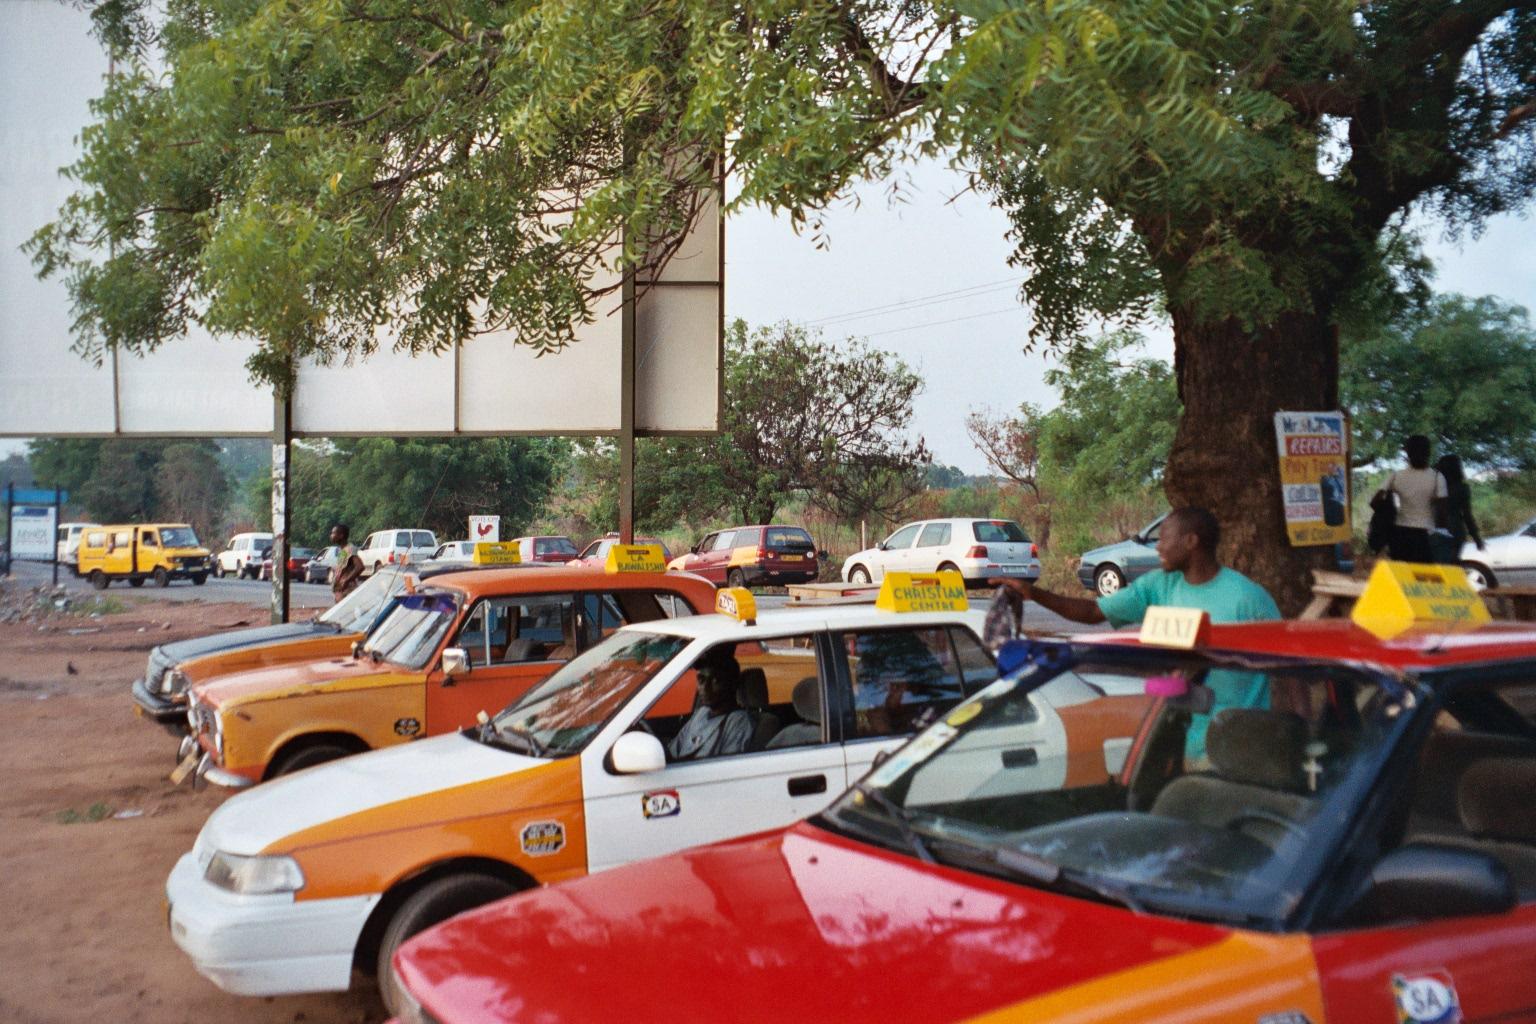 Ho taxi drivers trained in tourism etiquette